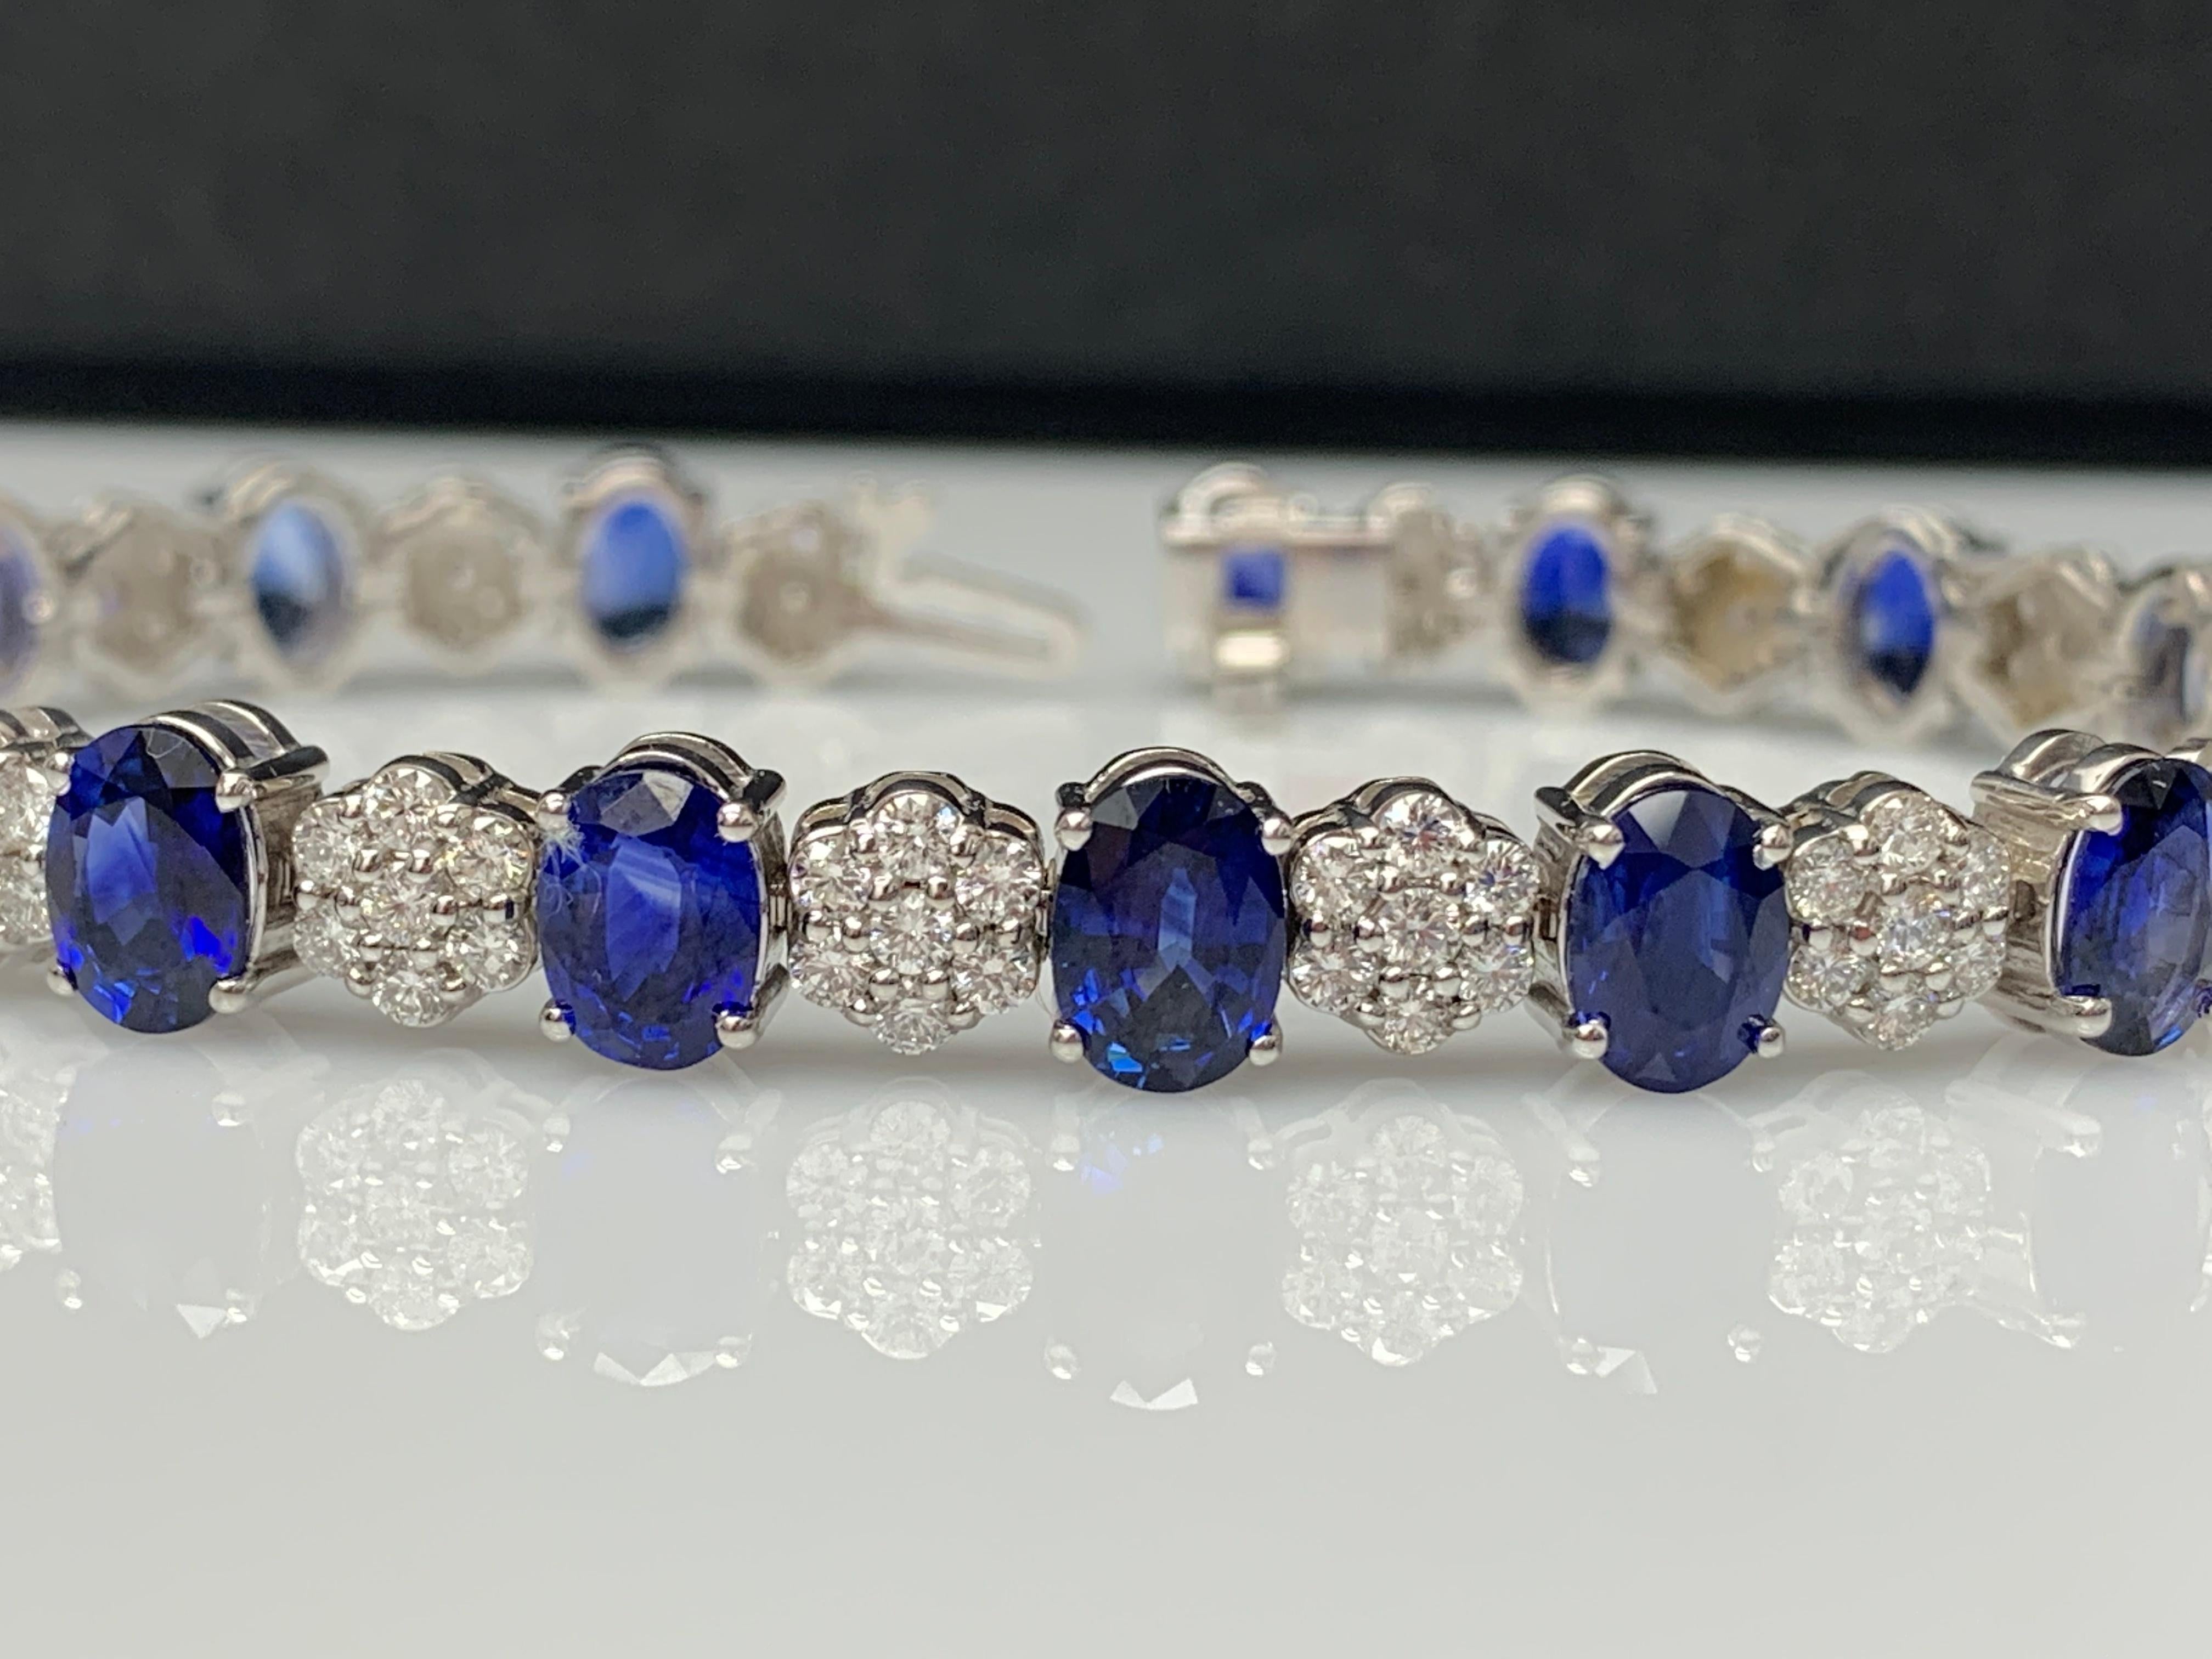 15.26 Carat Oval Cut Blue Sapphire and Diamond Tennis Bracelet in 14K White Gold For Sale 8